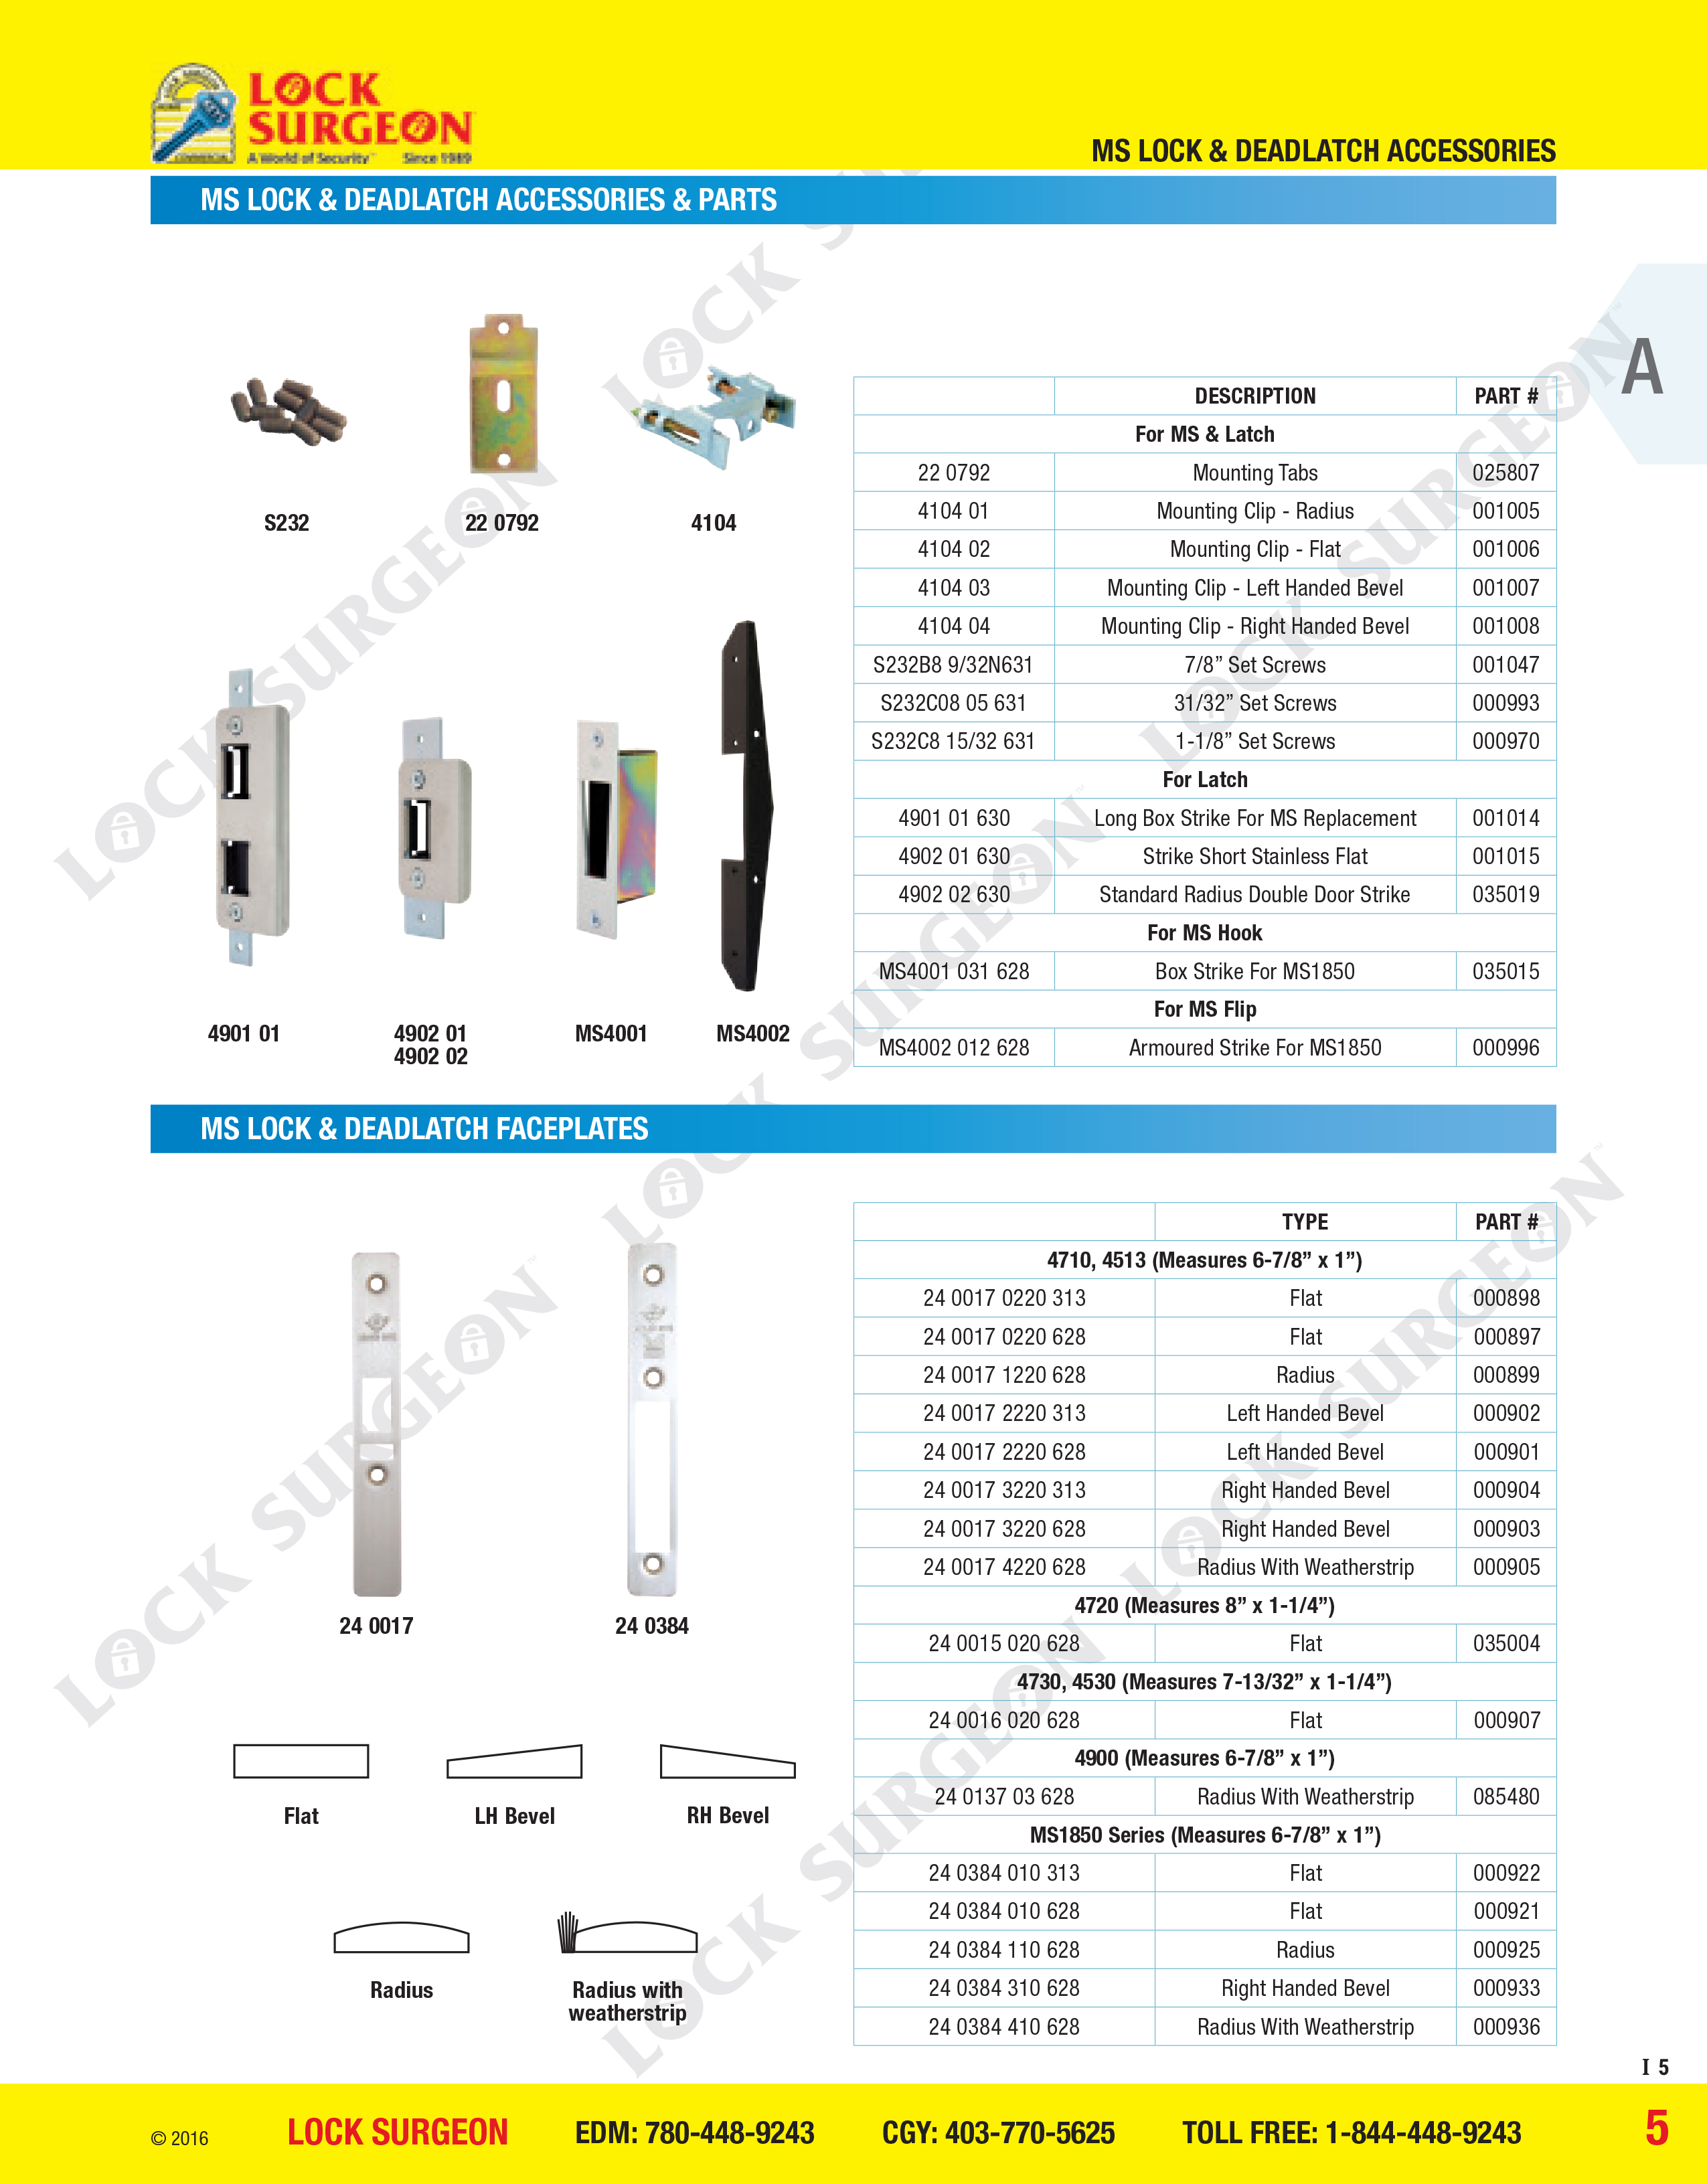 MS Lock and deadlatch accessories and parts